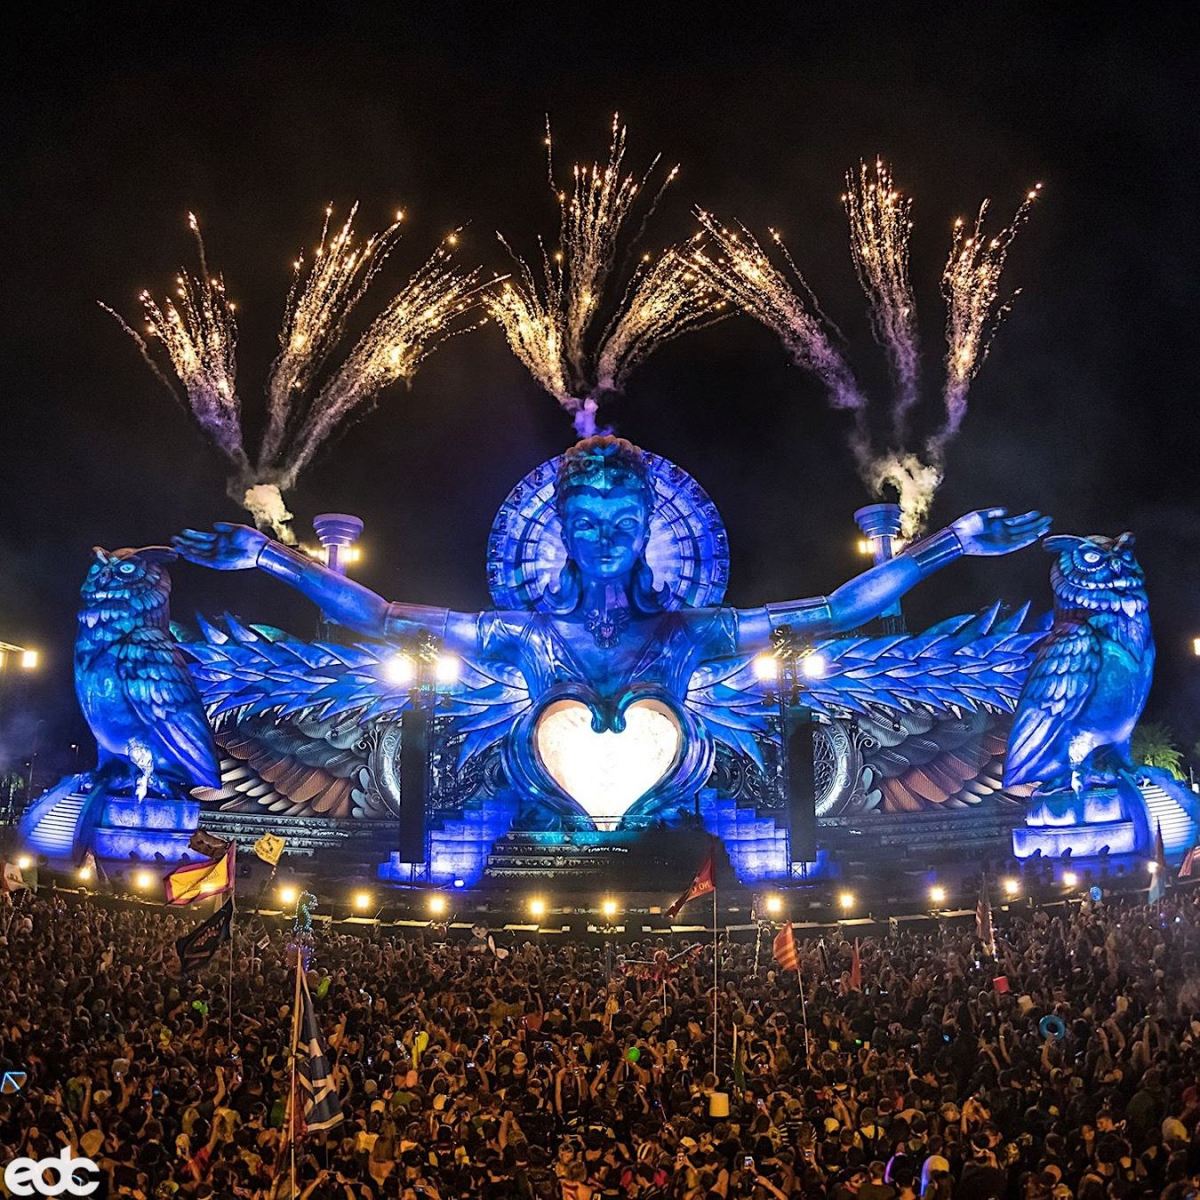 EDC Orlando Drops Heavy Lineup The Latest Electronic Dance